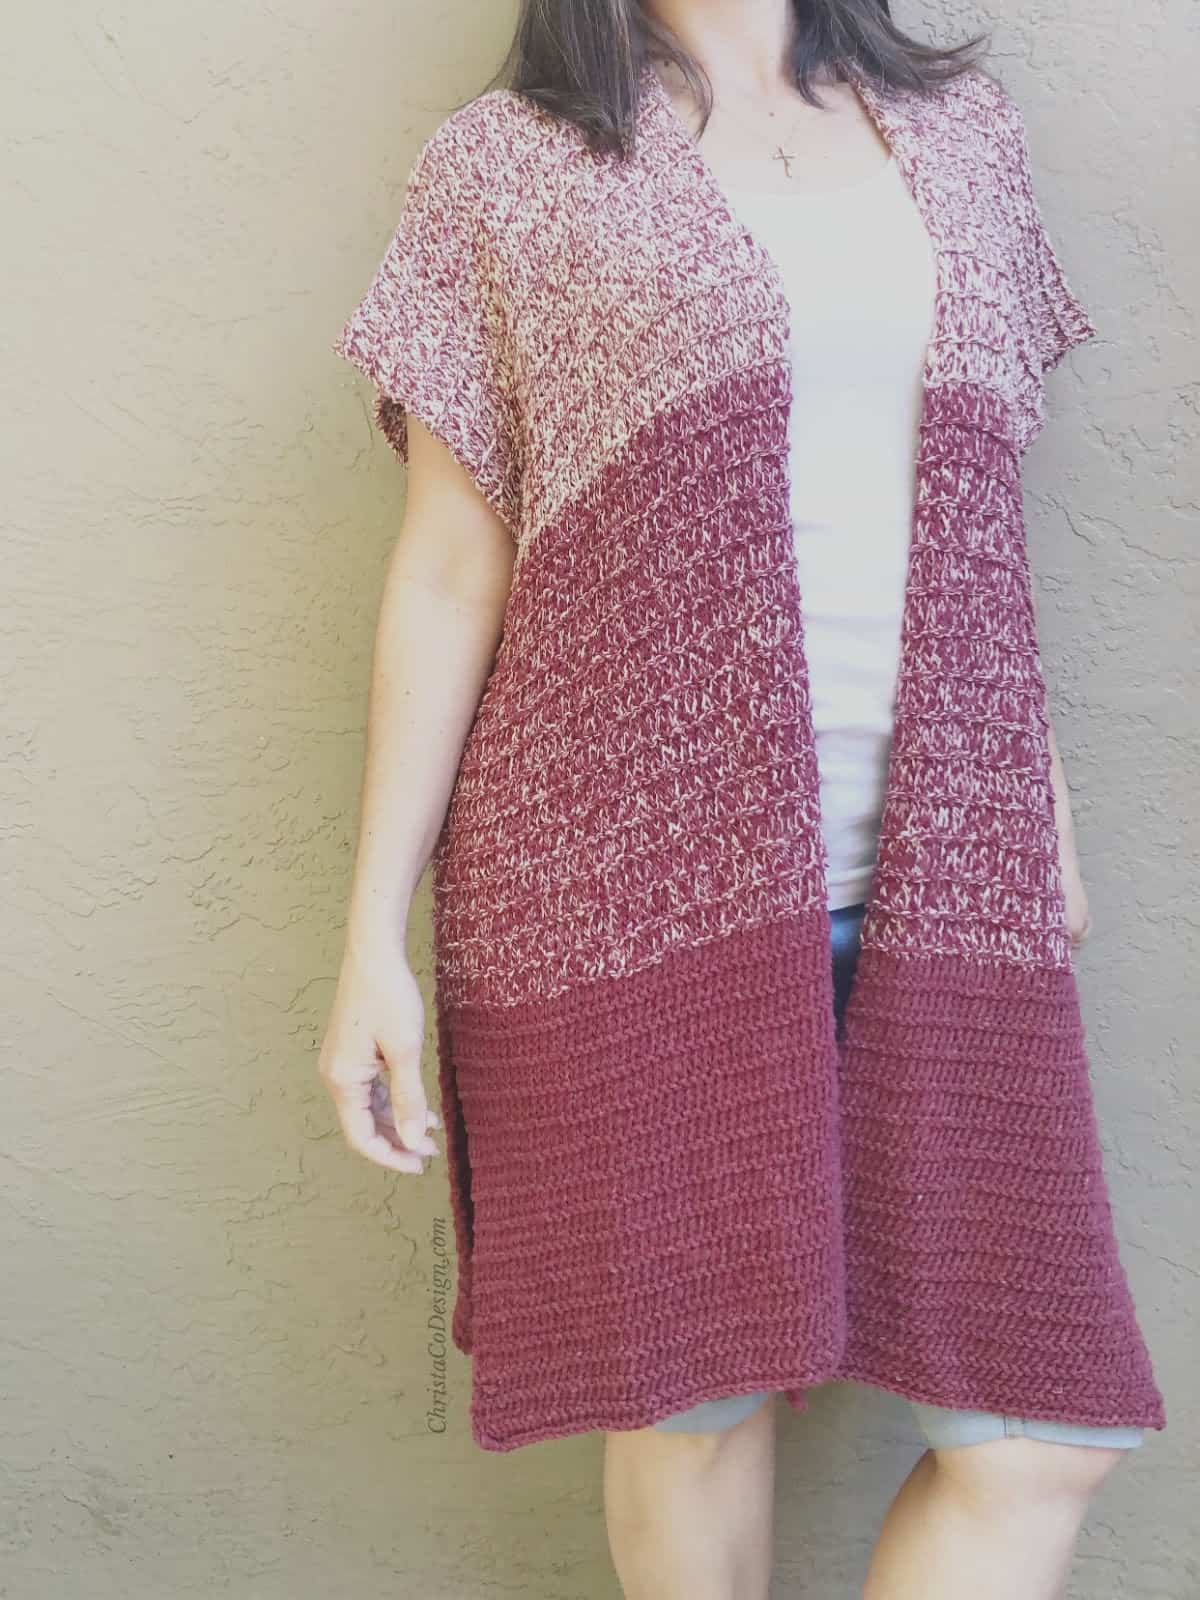 Woman in maroon ombre long knit cardigan over white top.